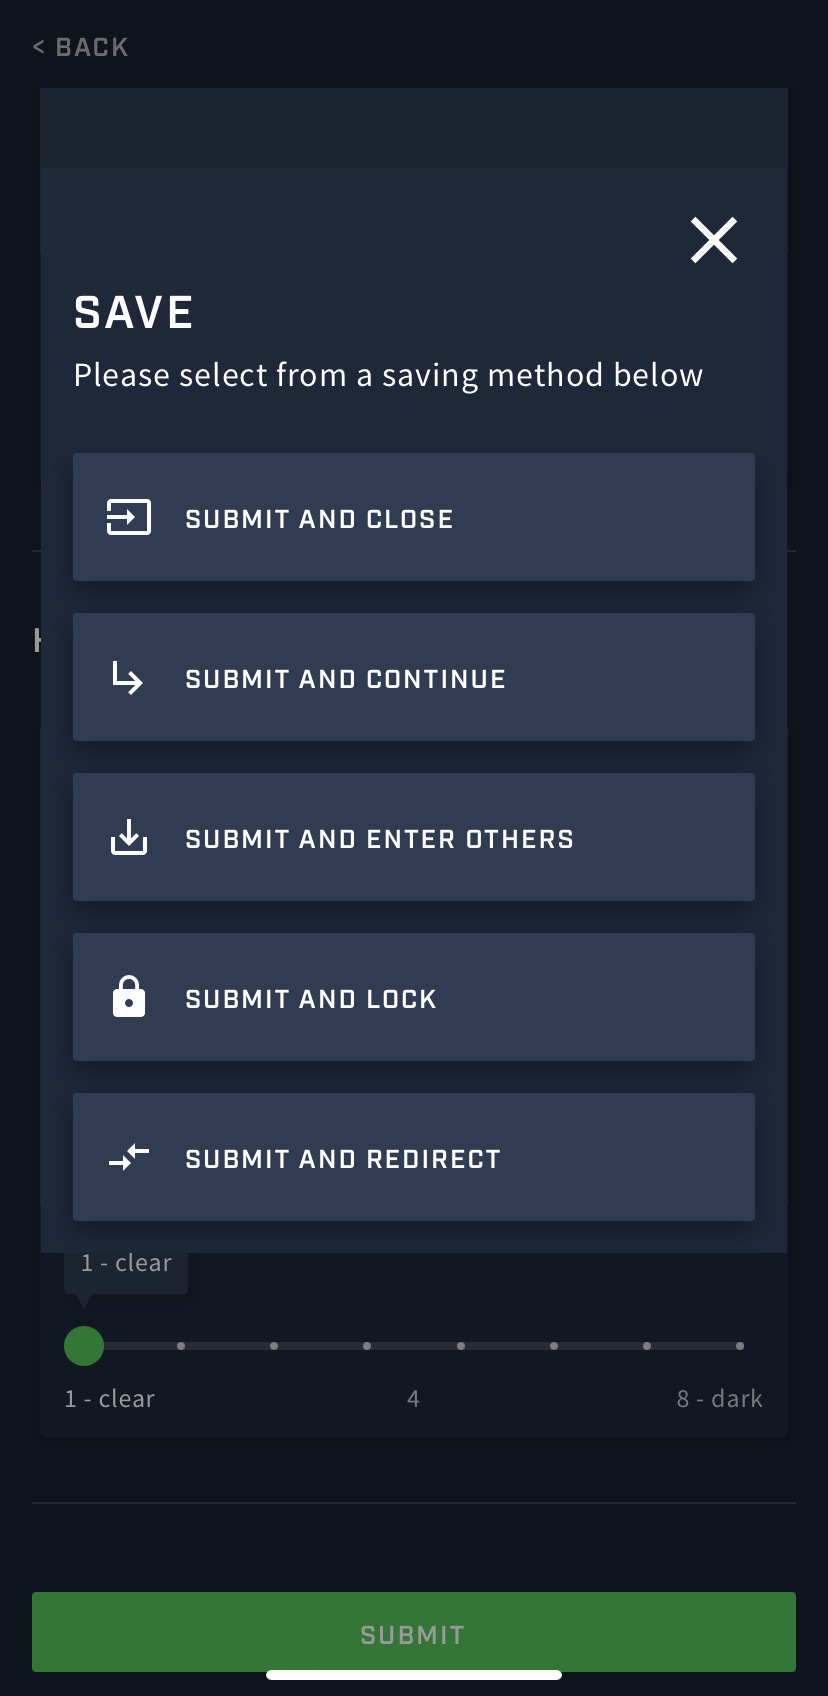 A screenshot of the different options available to save a form on the Athlete app.